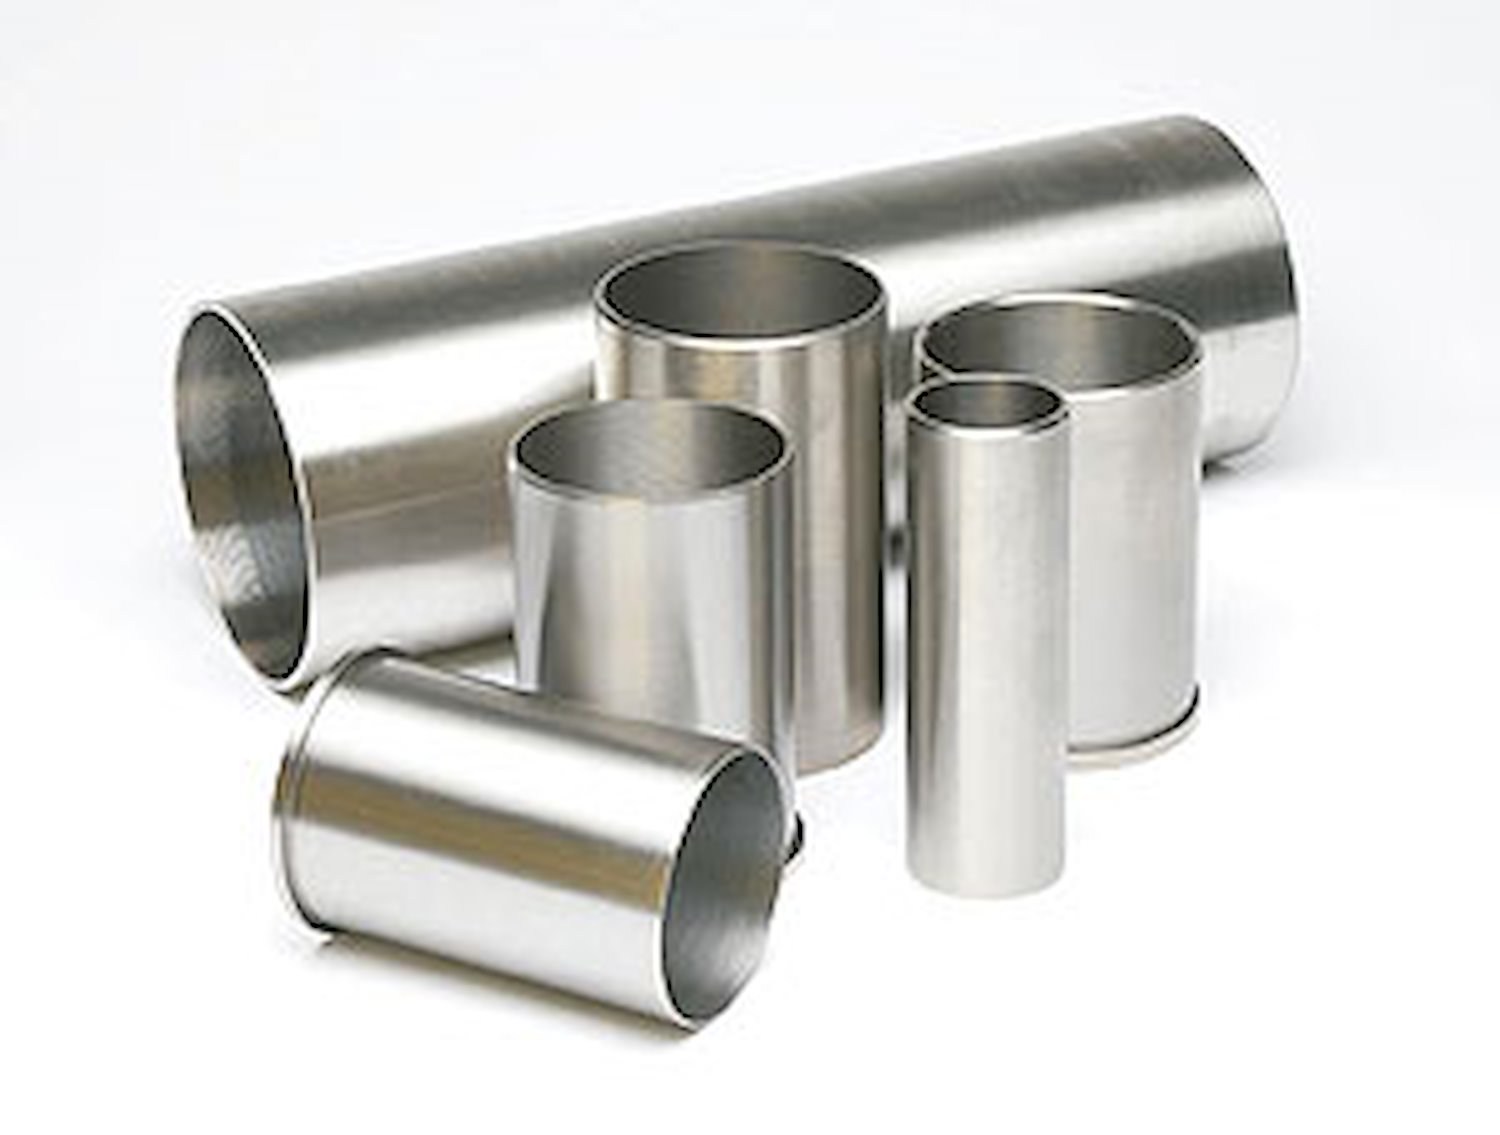 Cylinder Sleeve Bore: 2.9530" Length: 6-3/8" Wall Thickness: 1/8"